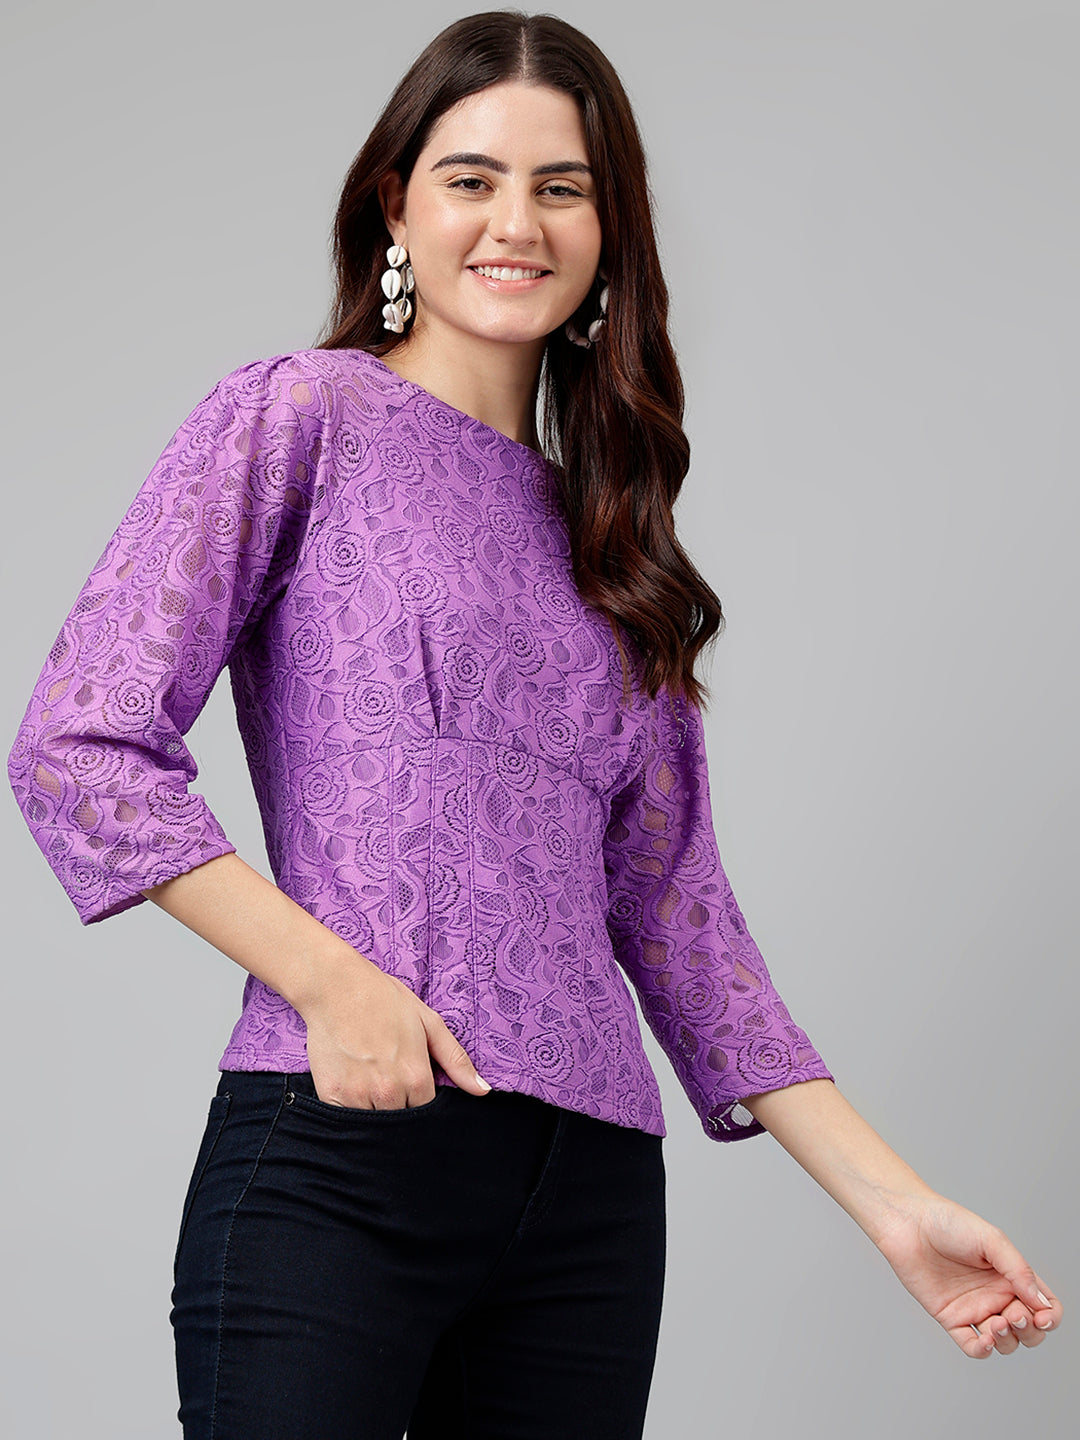 Lavender Solid Nylon Stretch Knit-Top